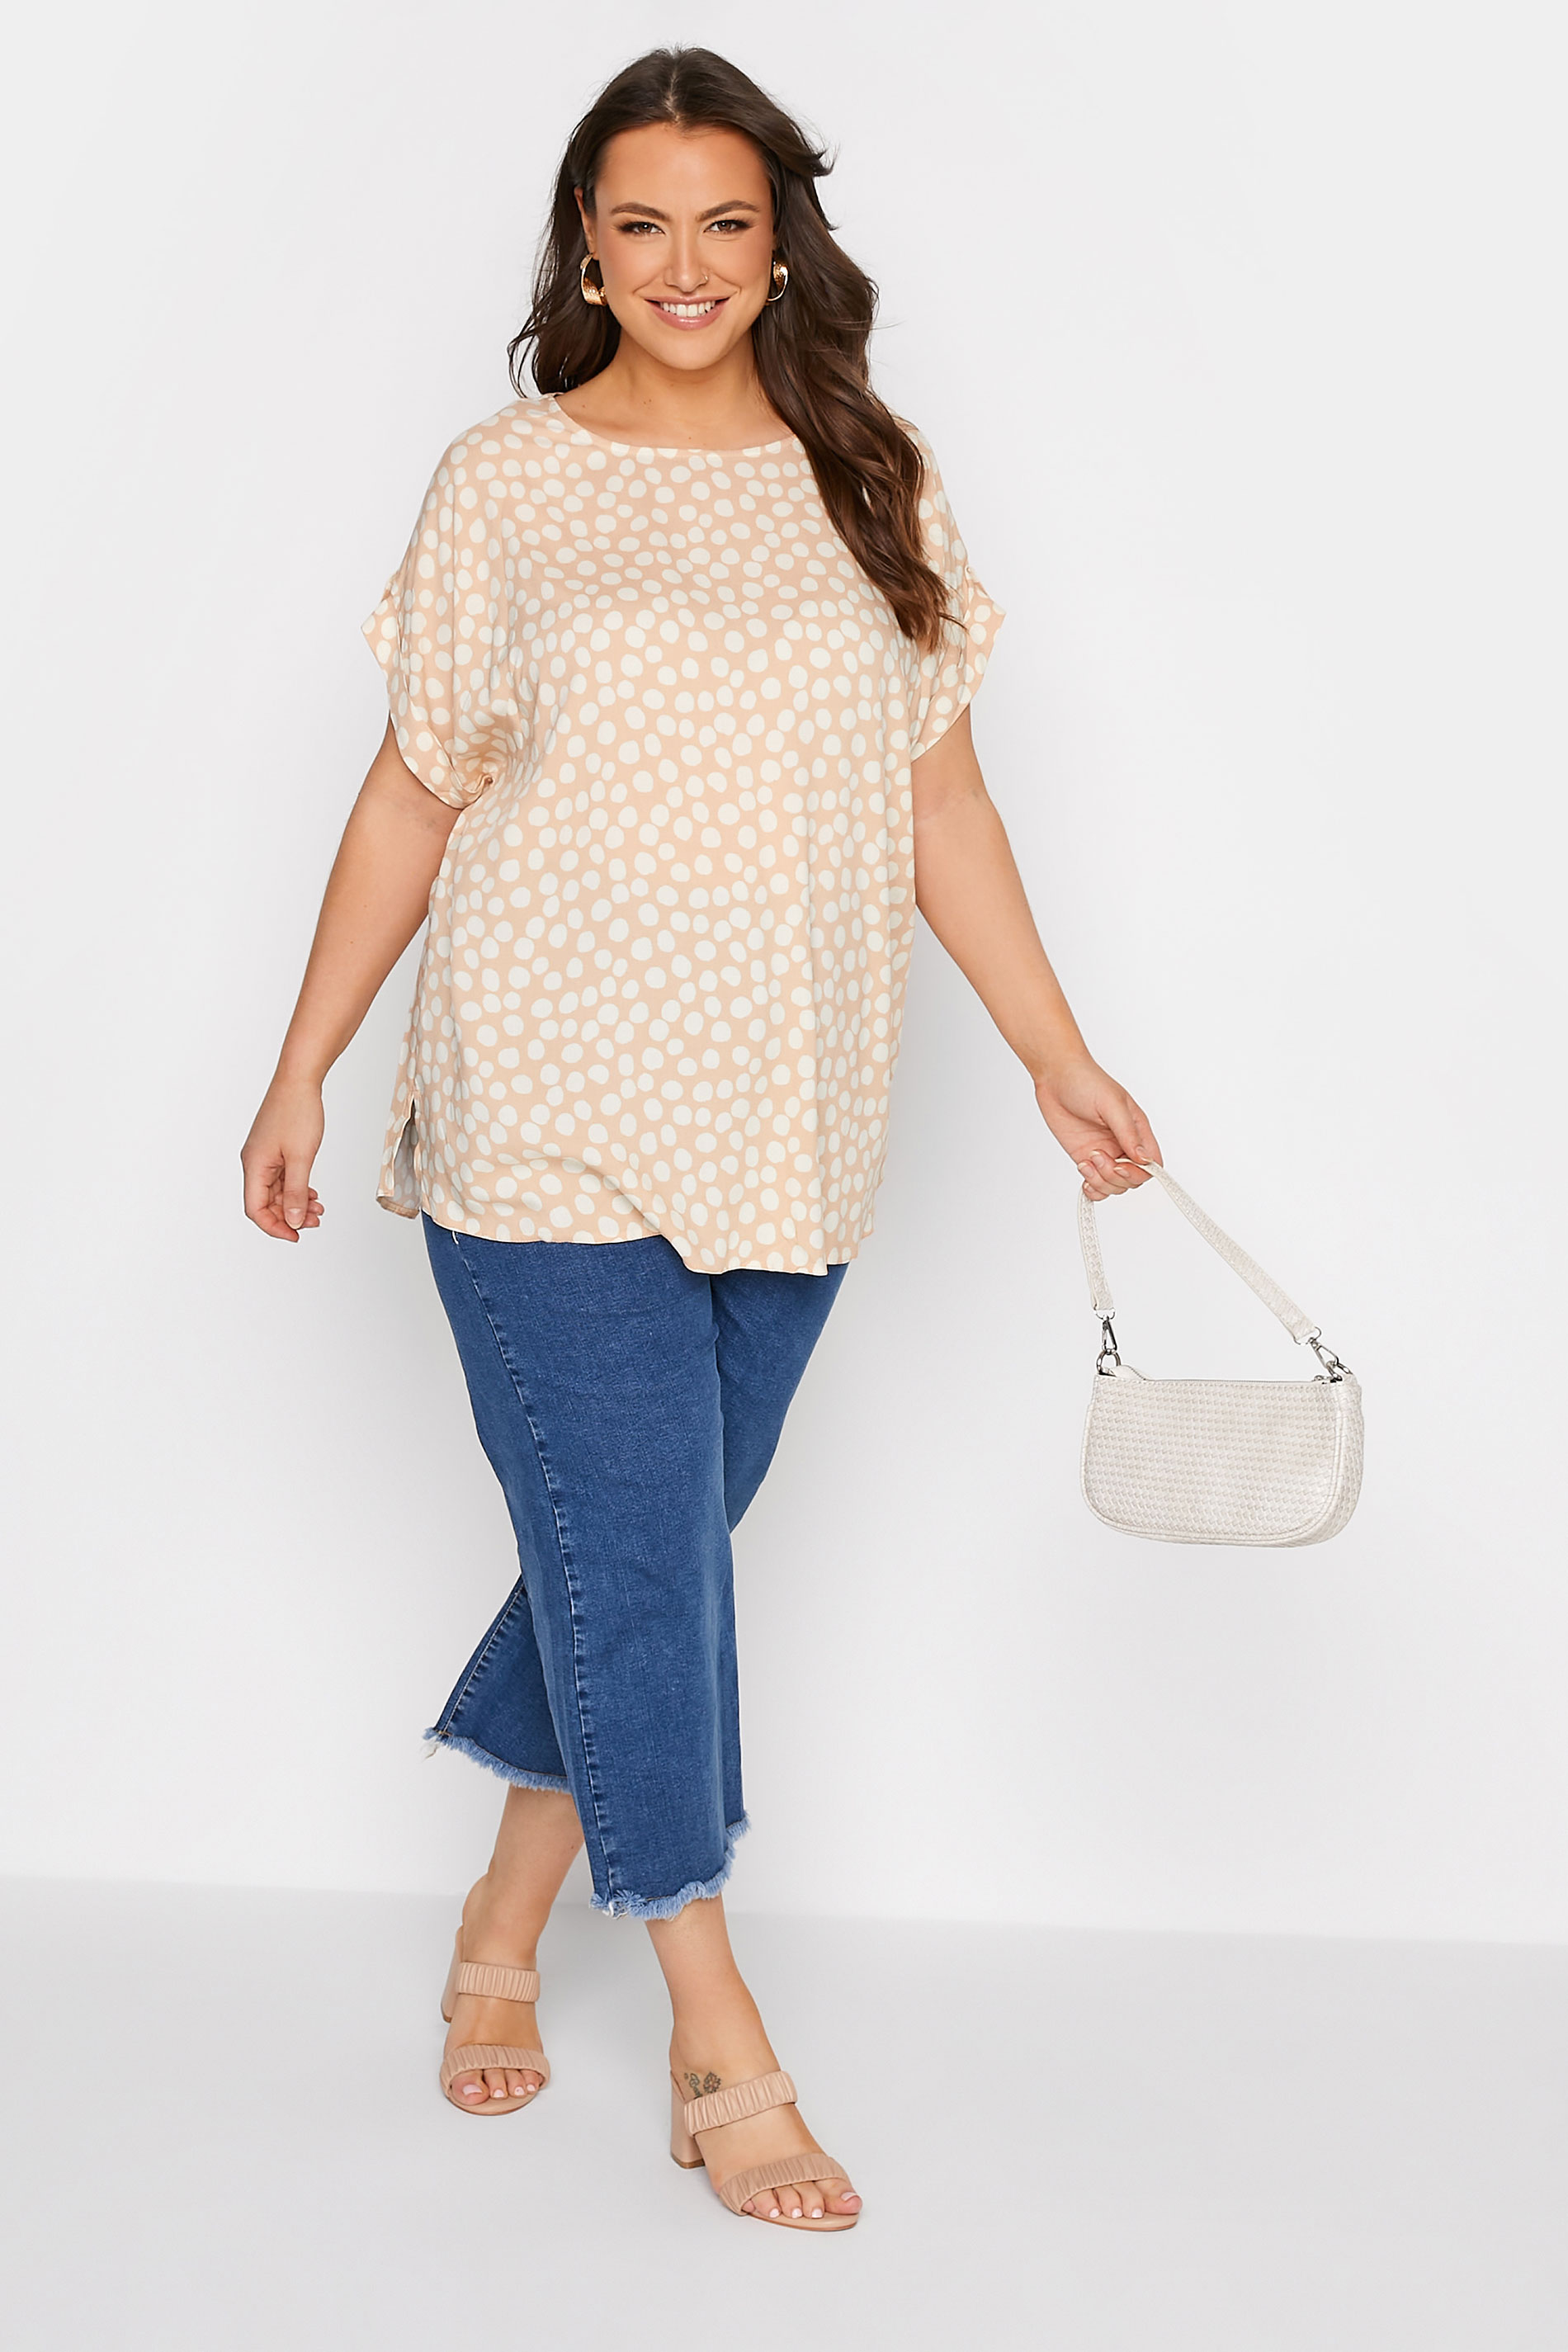 Grande taille  Tops Grande taille  Blouses & Chemisiers | Top Beige à Pois Manches Courtes - VP28023